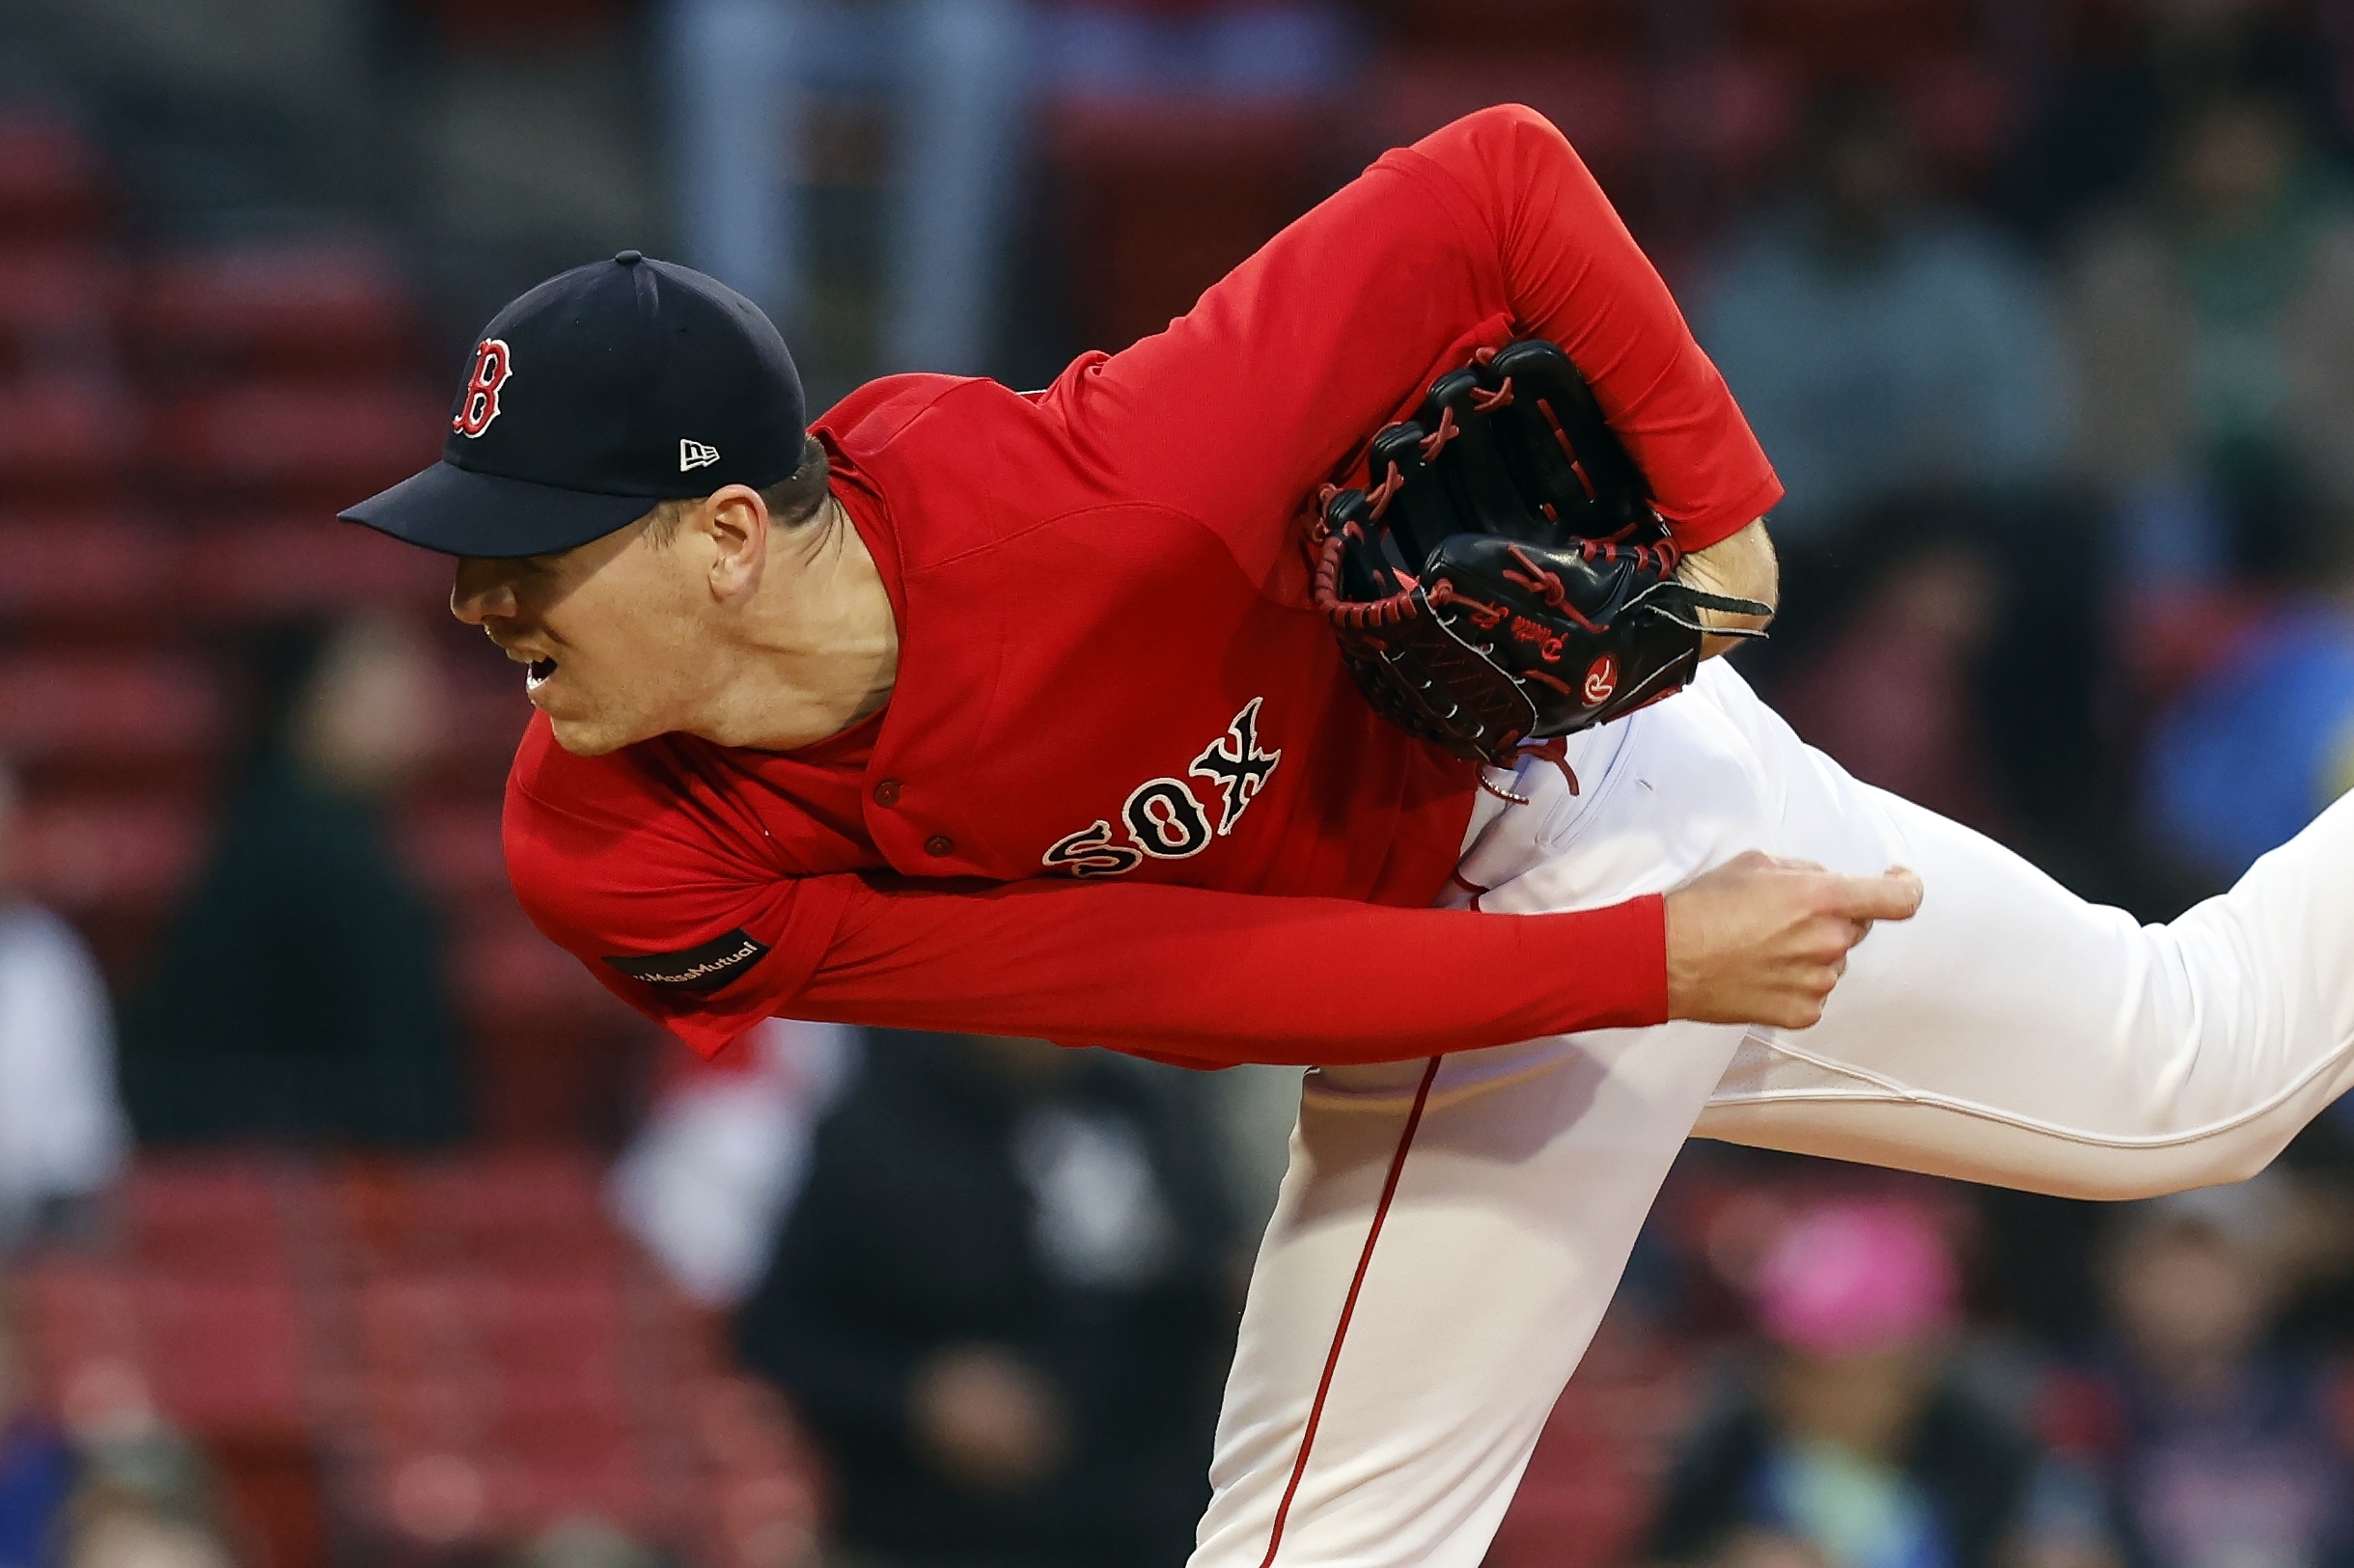 Boston Red Sox - Nick Pivetta came out firing in his